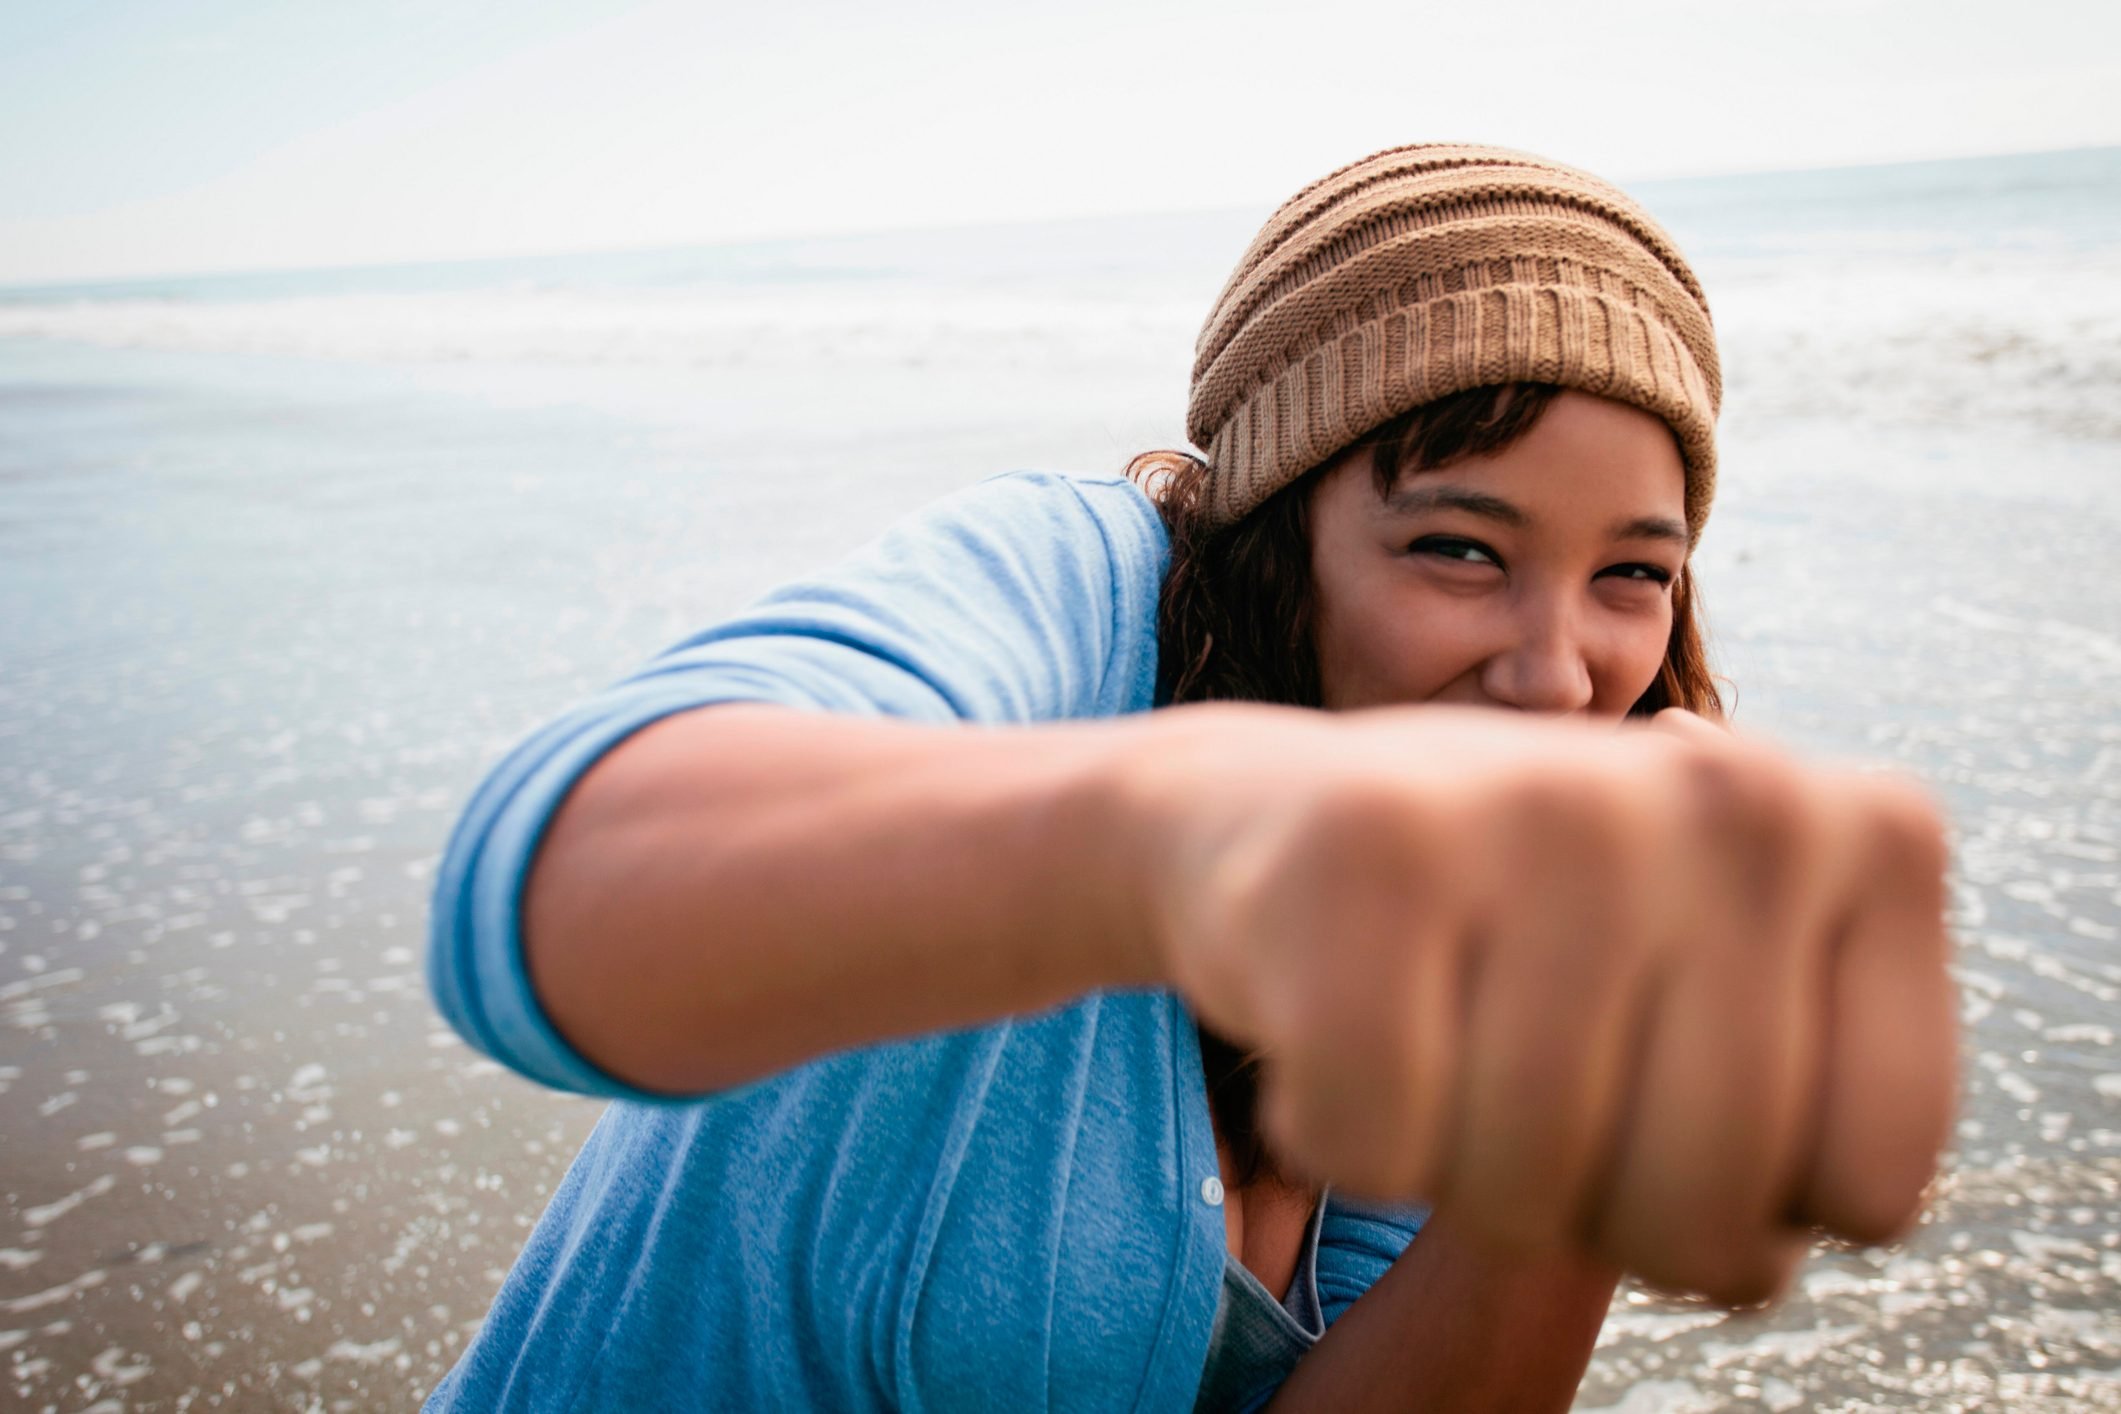 Smiling woman making fists on beach